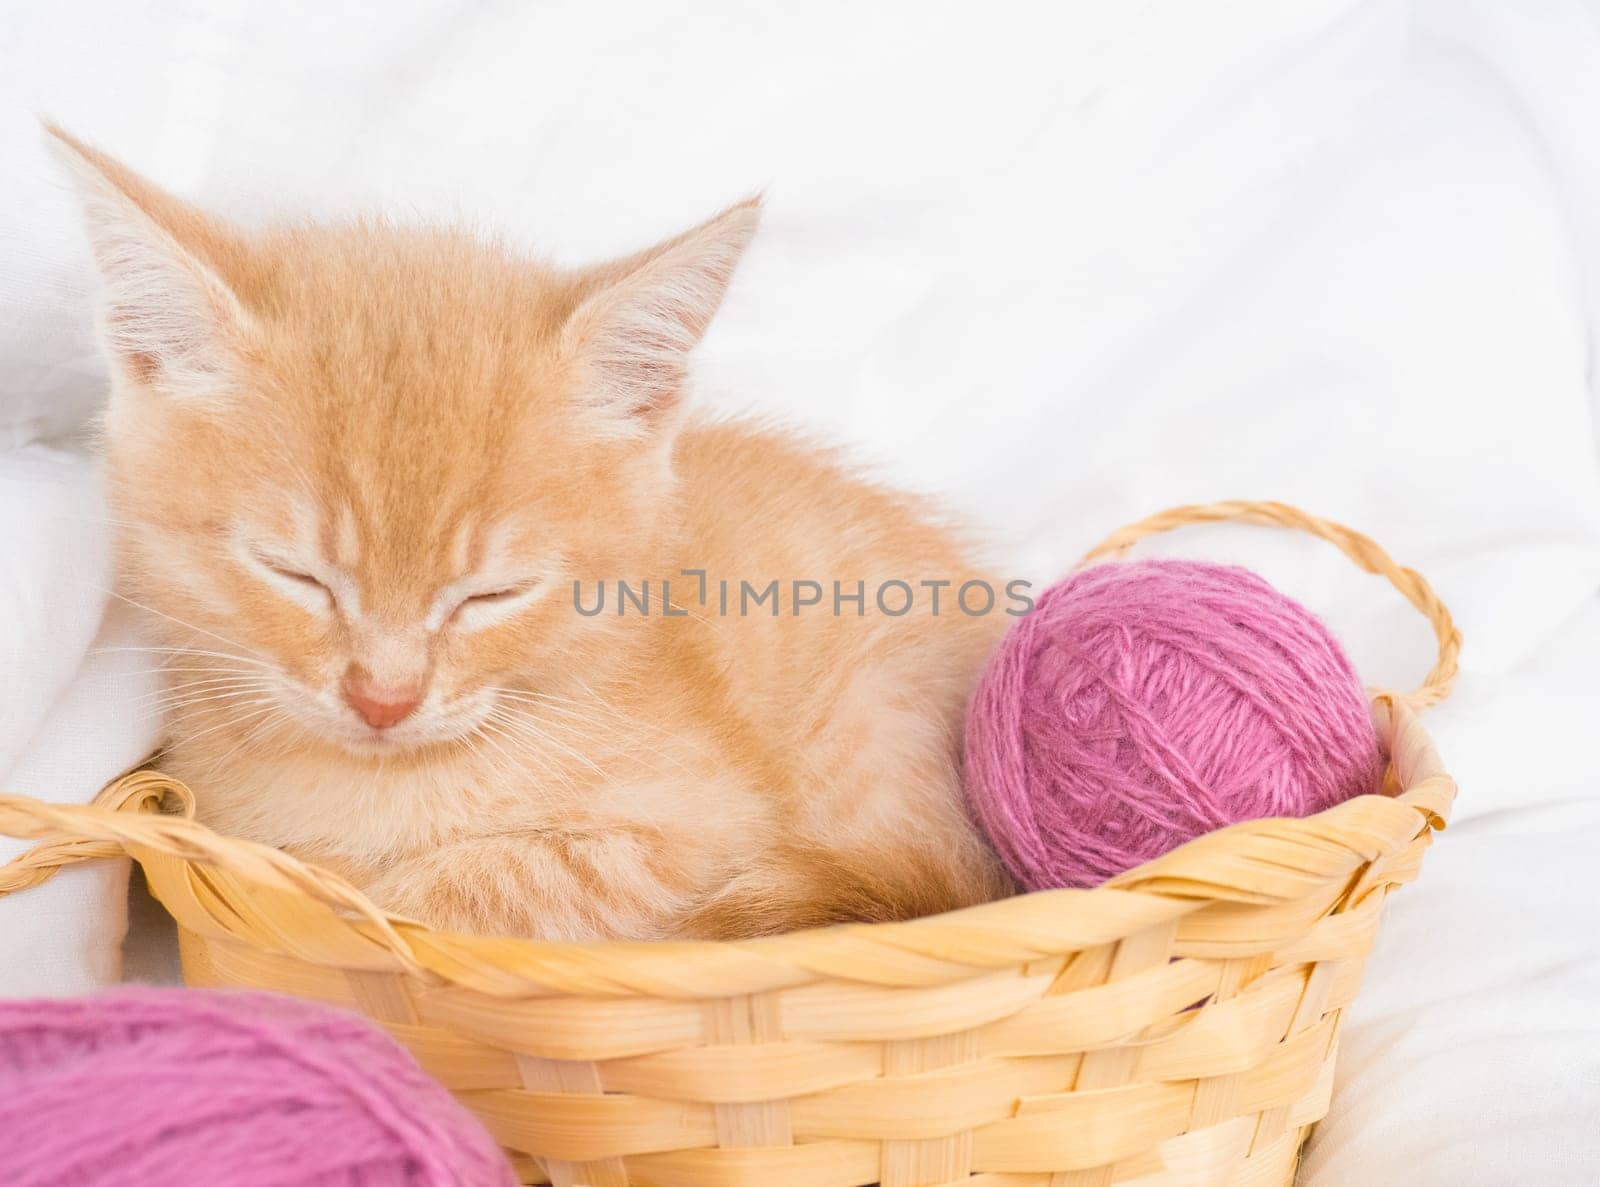 Ginger kitten sleeps in a straw basket with pink balls, skeins of thread on a white bed. by Ekaterina34